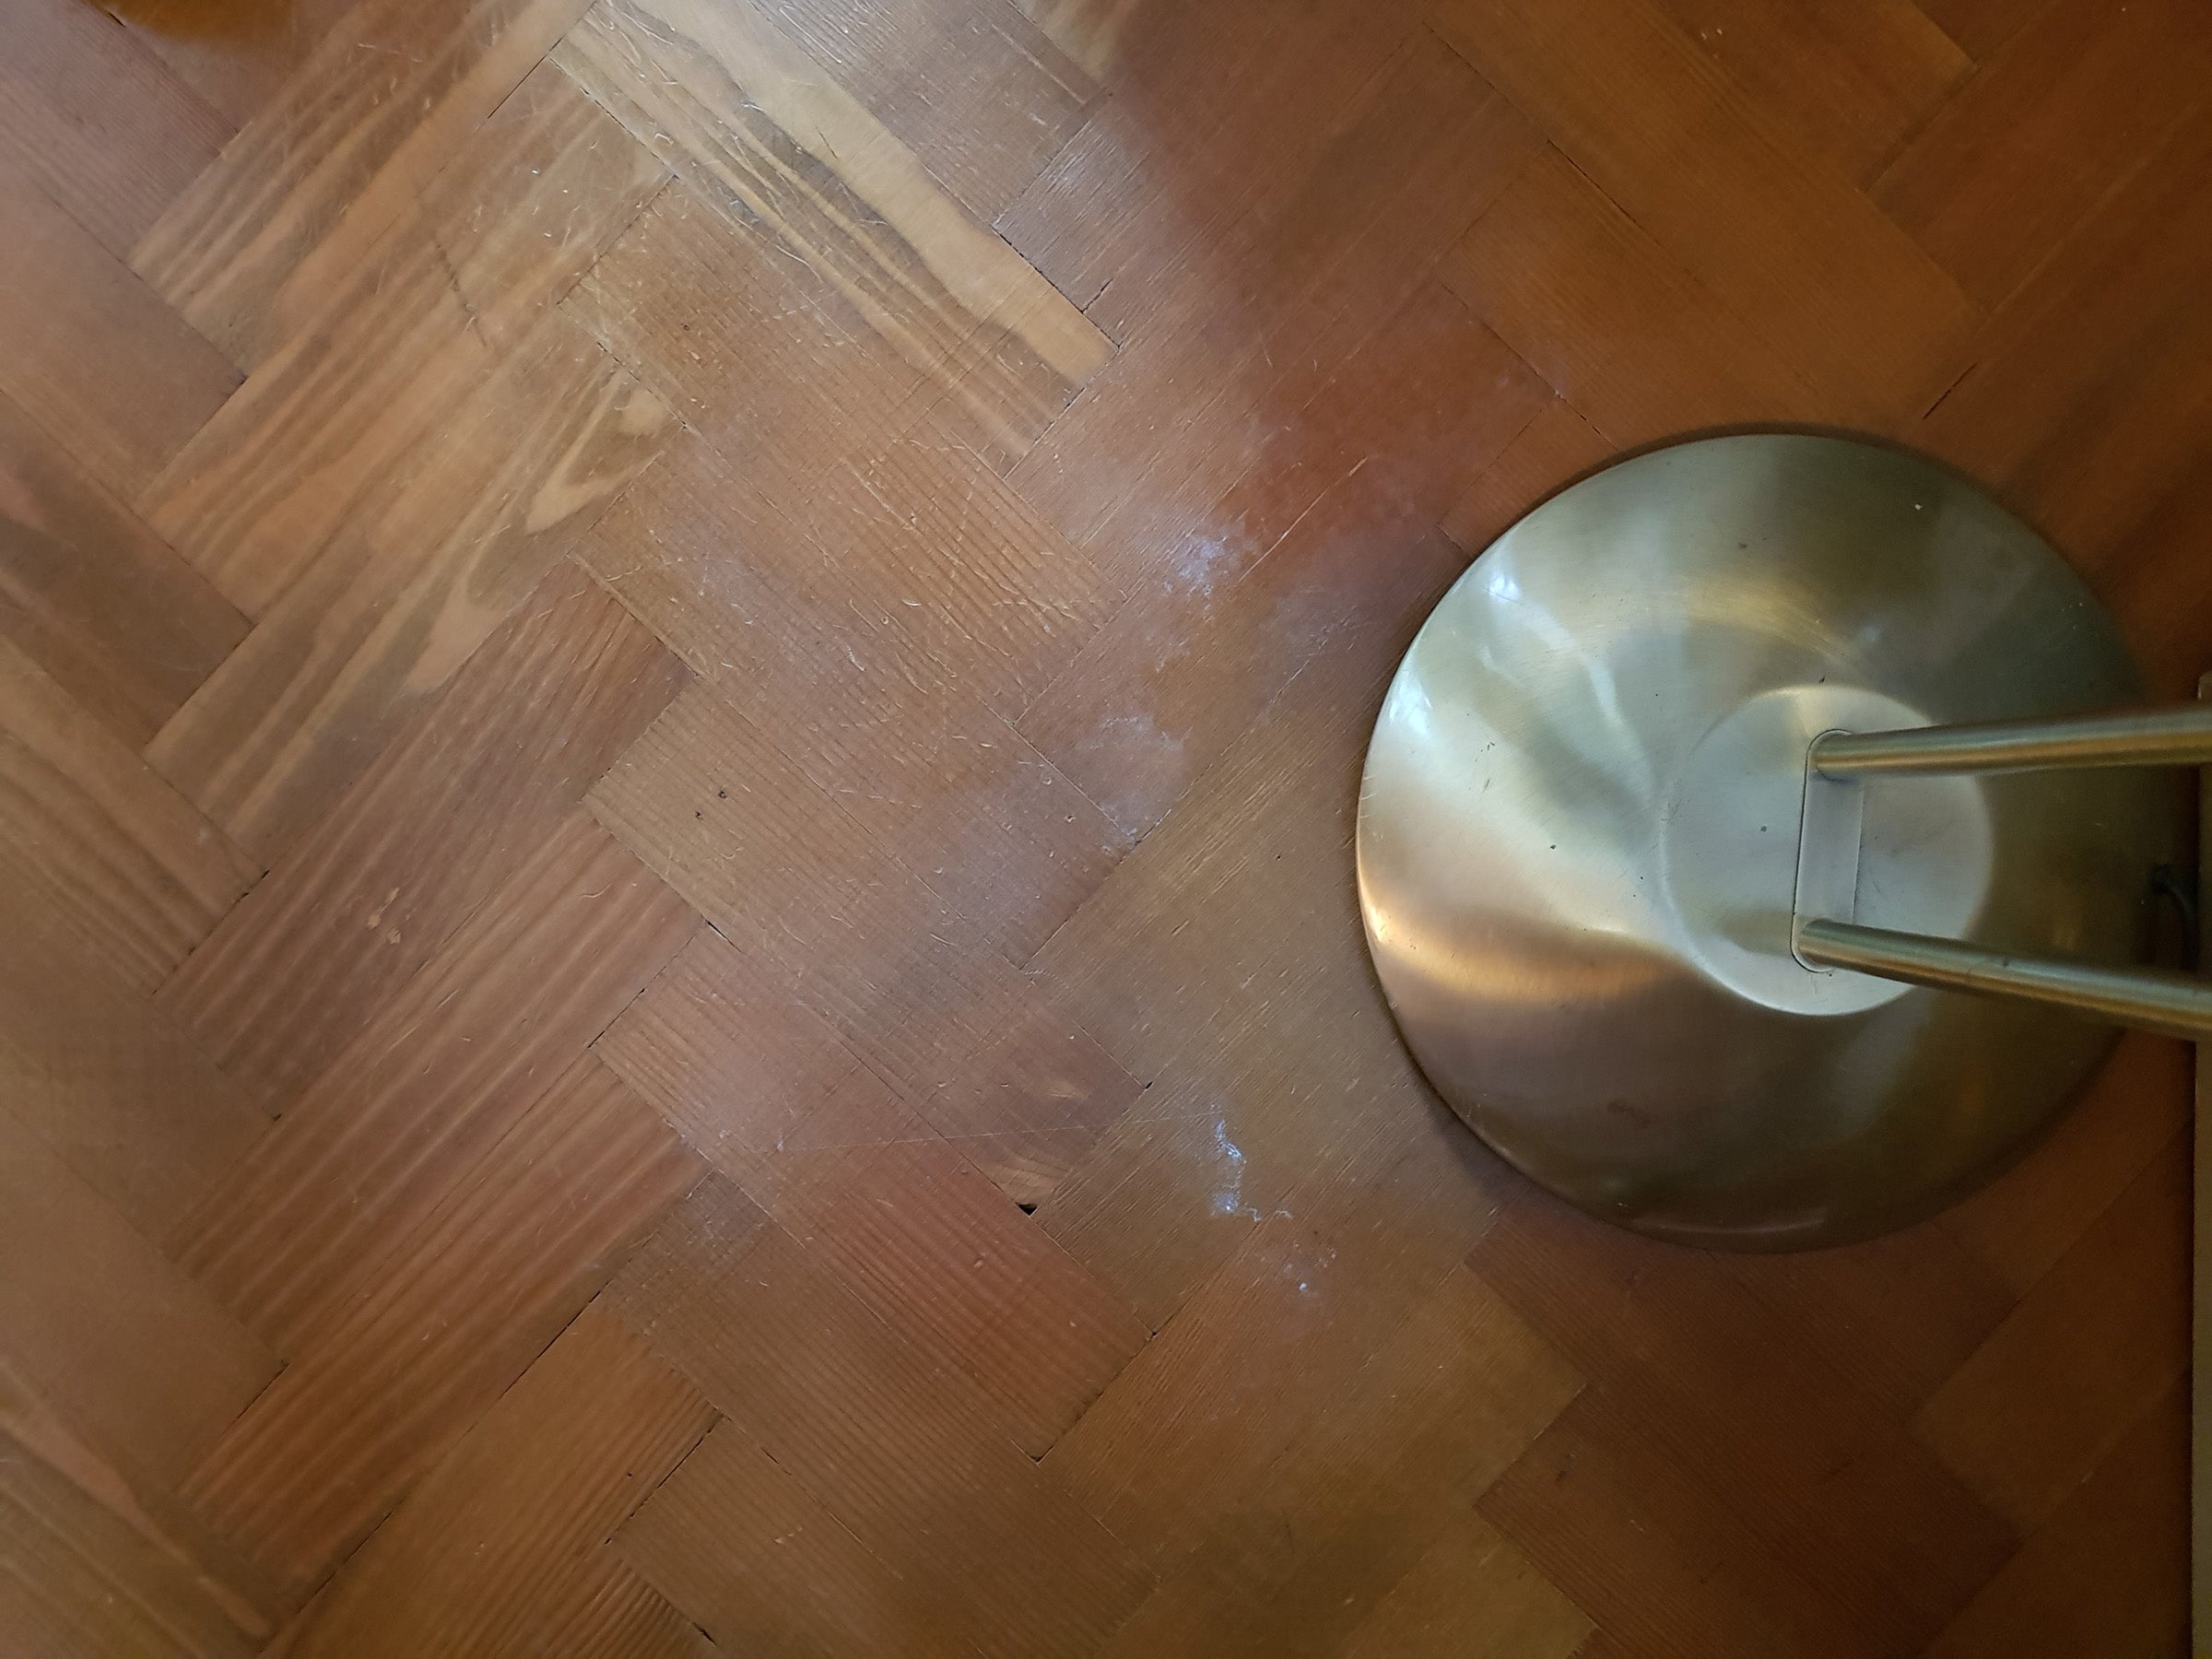 Roomba vacuum under a chair on a wooden floor.